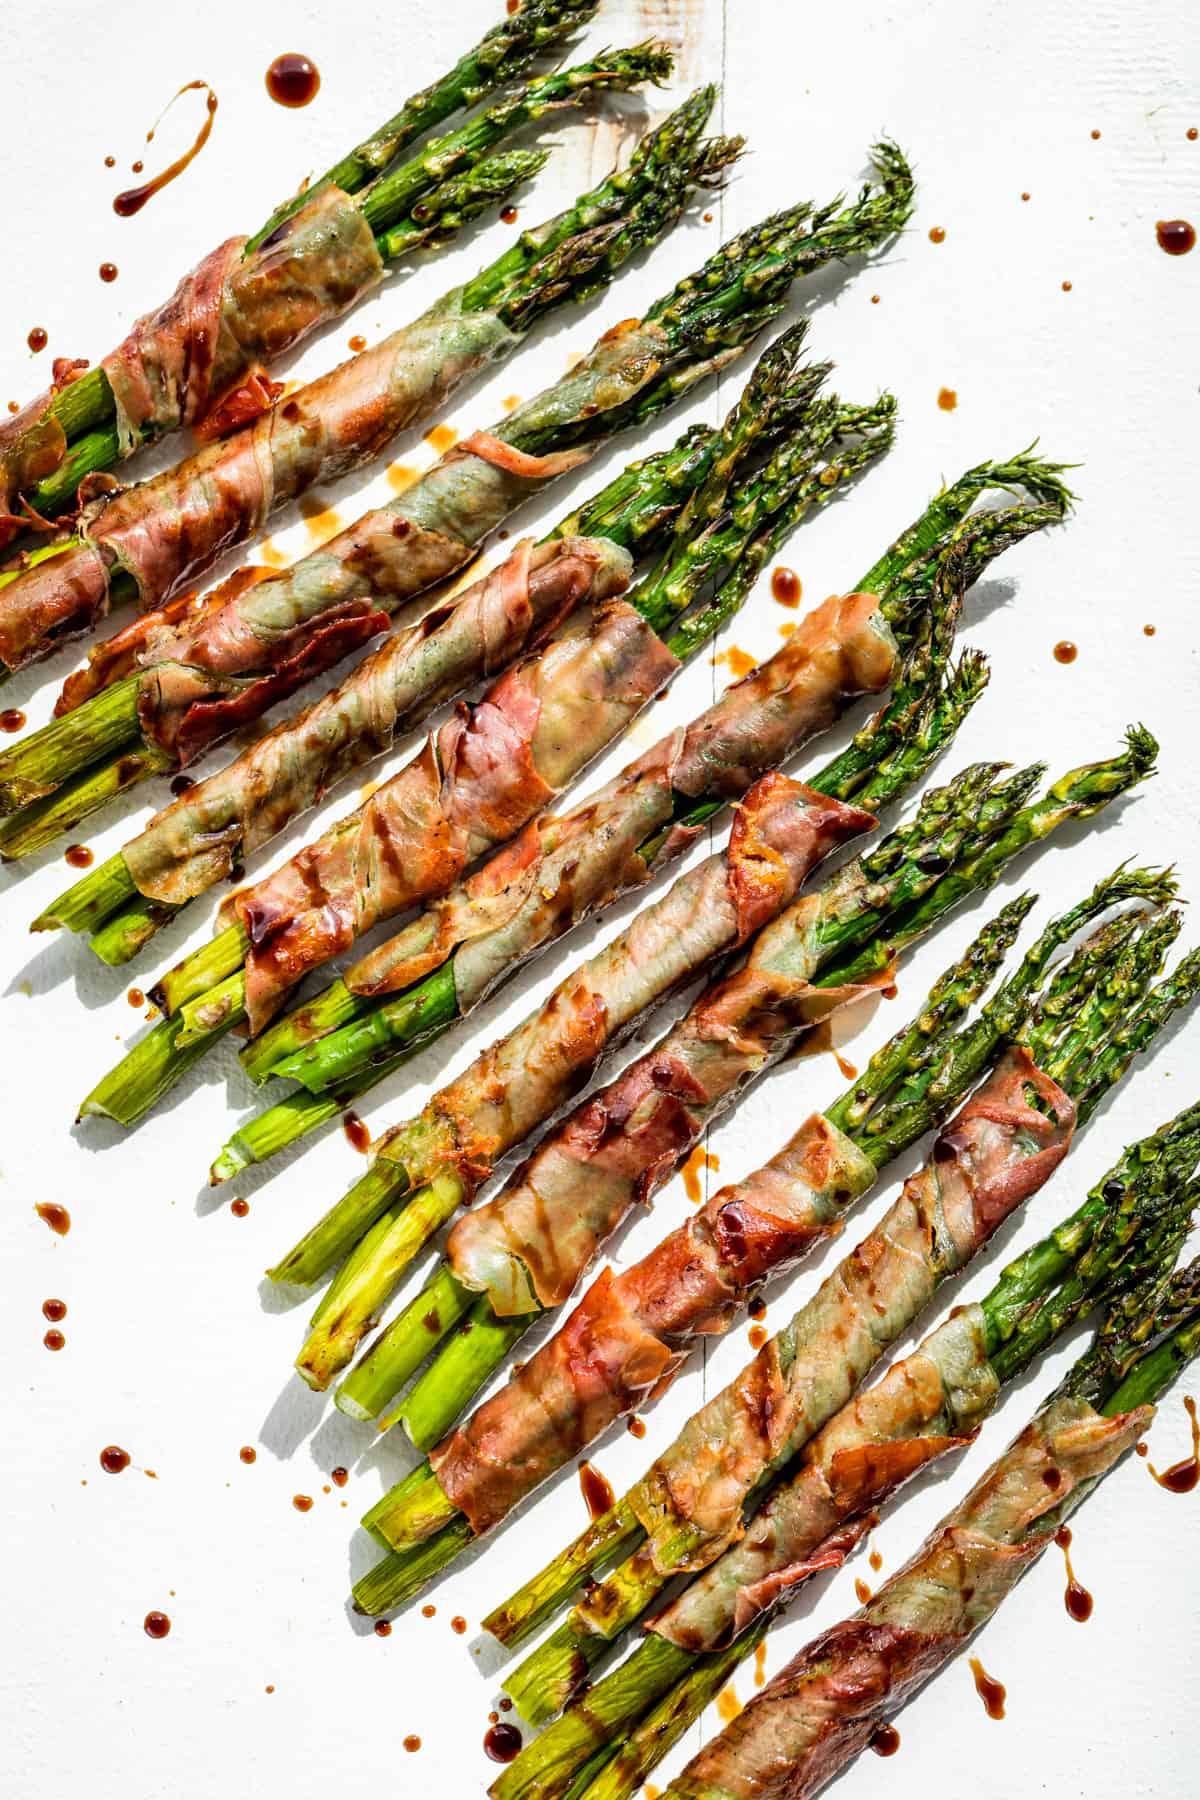 Prosciutto Wrapped Asparagus spears on a white background drizzled with aged balsamic vinegar.